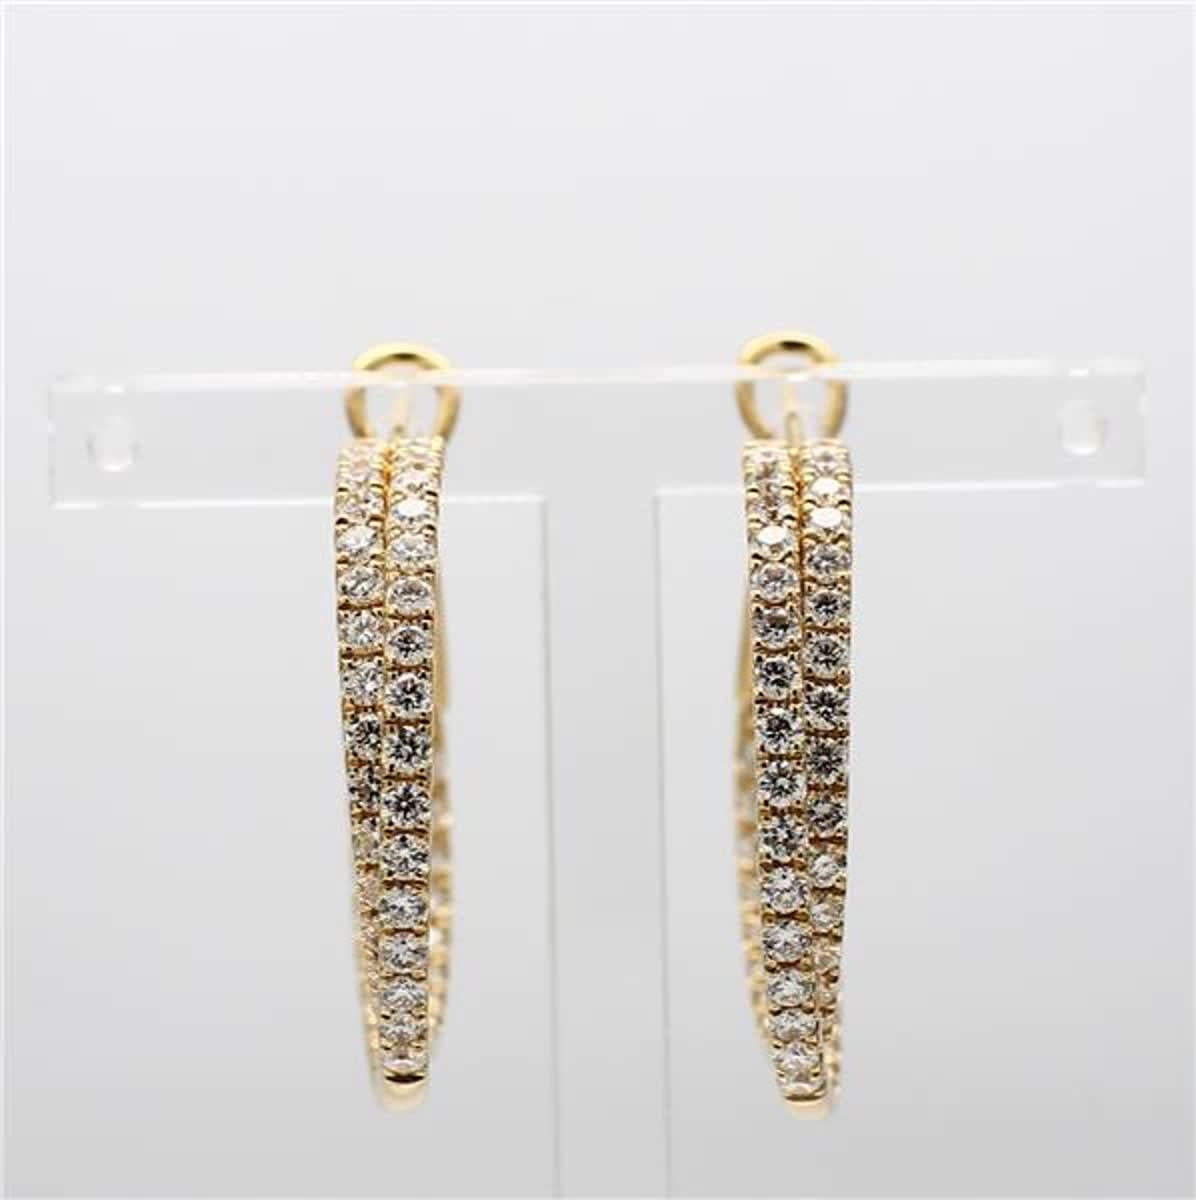 RareGemWorld's classic diamond earrings. Mounted in a beautiful 18K Yellow Gold setting with natural round cut white diamonds. These earrings are guaranteed to impress and enhance your personal collection!

Total Weight: 2.62cts

Width: 32.6